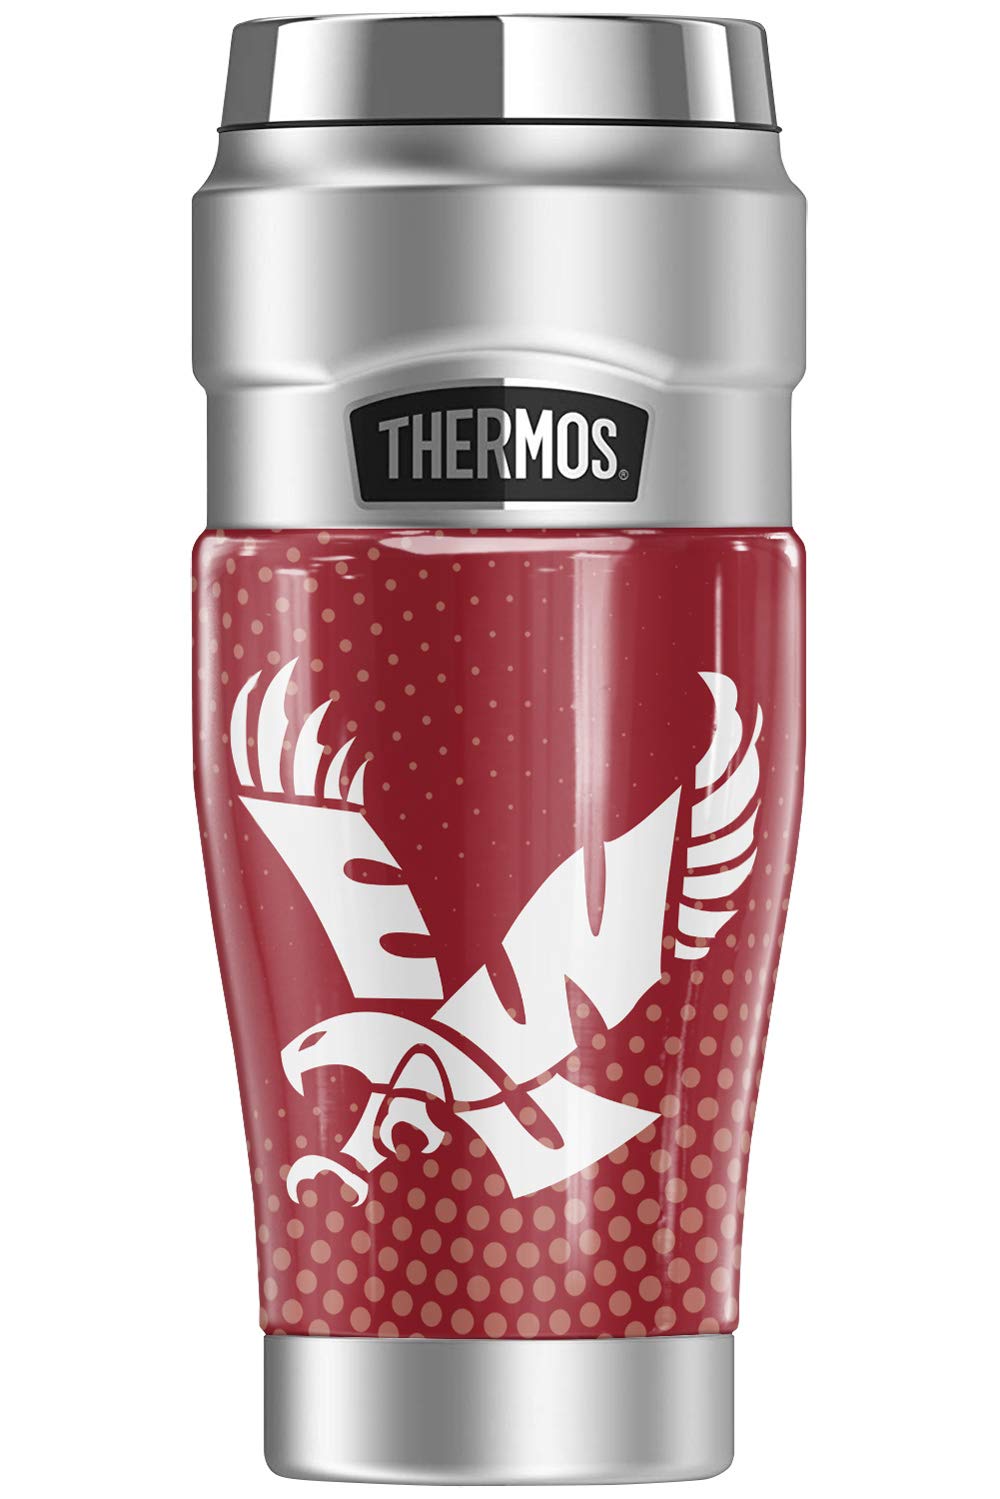 THERMOS Eastern Washington University OFFICIAL Radial Dots STAINLESS KING Stainless Steel Travel Tumbler, Vacuum insulated & Double Wall, 16oz